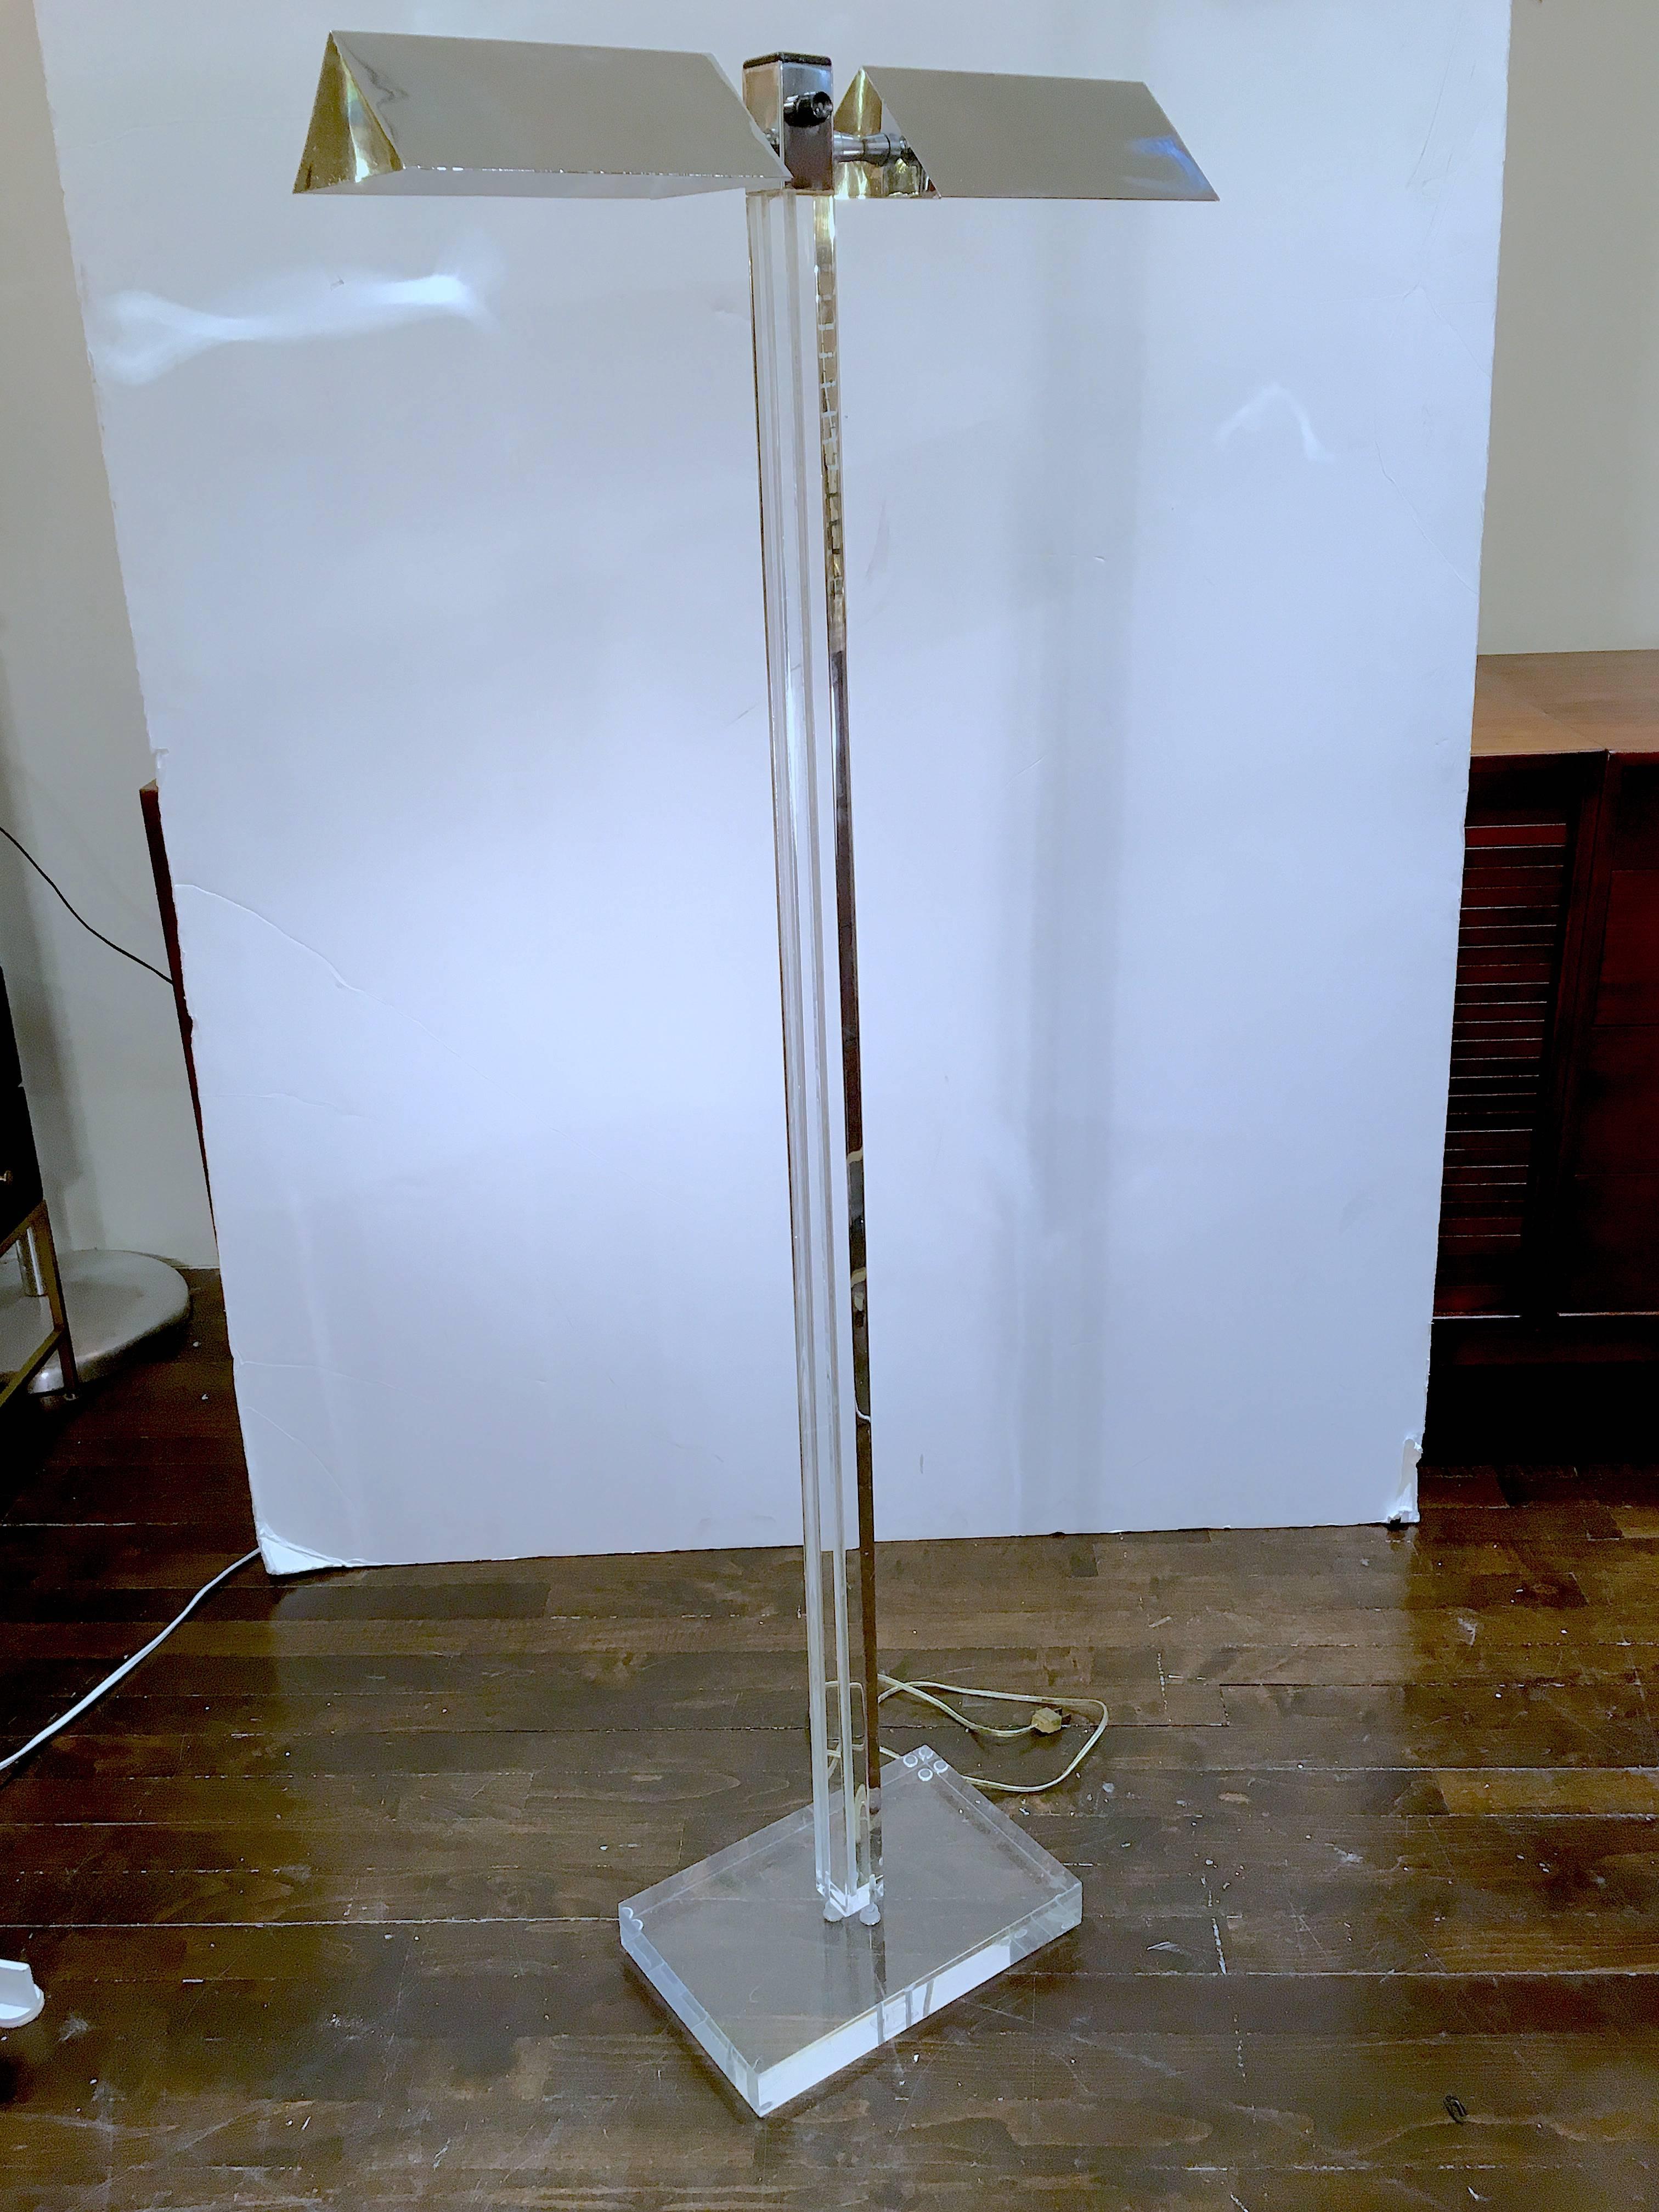 Stylish Lucite floor lamp by George Kovacs. The lamp has a pair of light bulbs, each covered by adjustable chrome shades. The width of the lamp is 21 inches at the chrome shades. The depth of the lamp is 8 inches at the Lucite base. Please contact